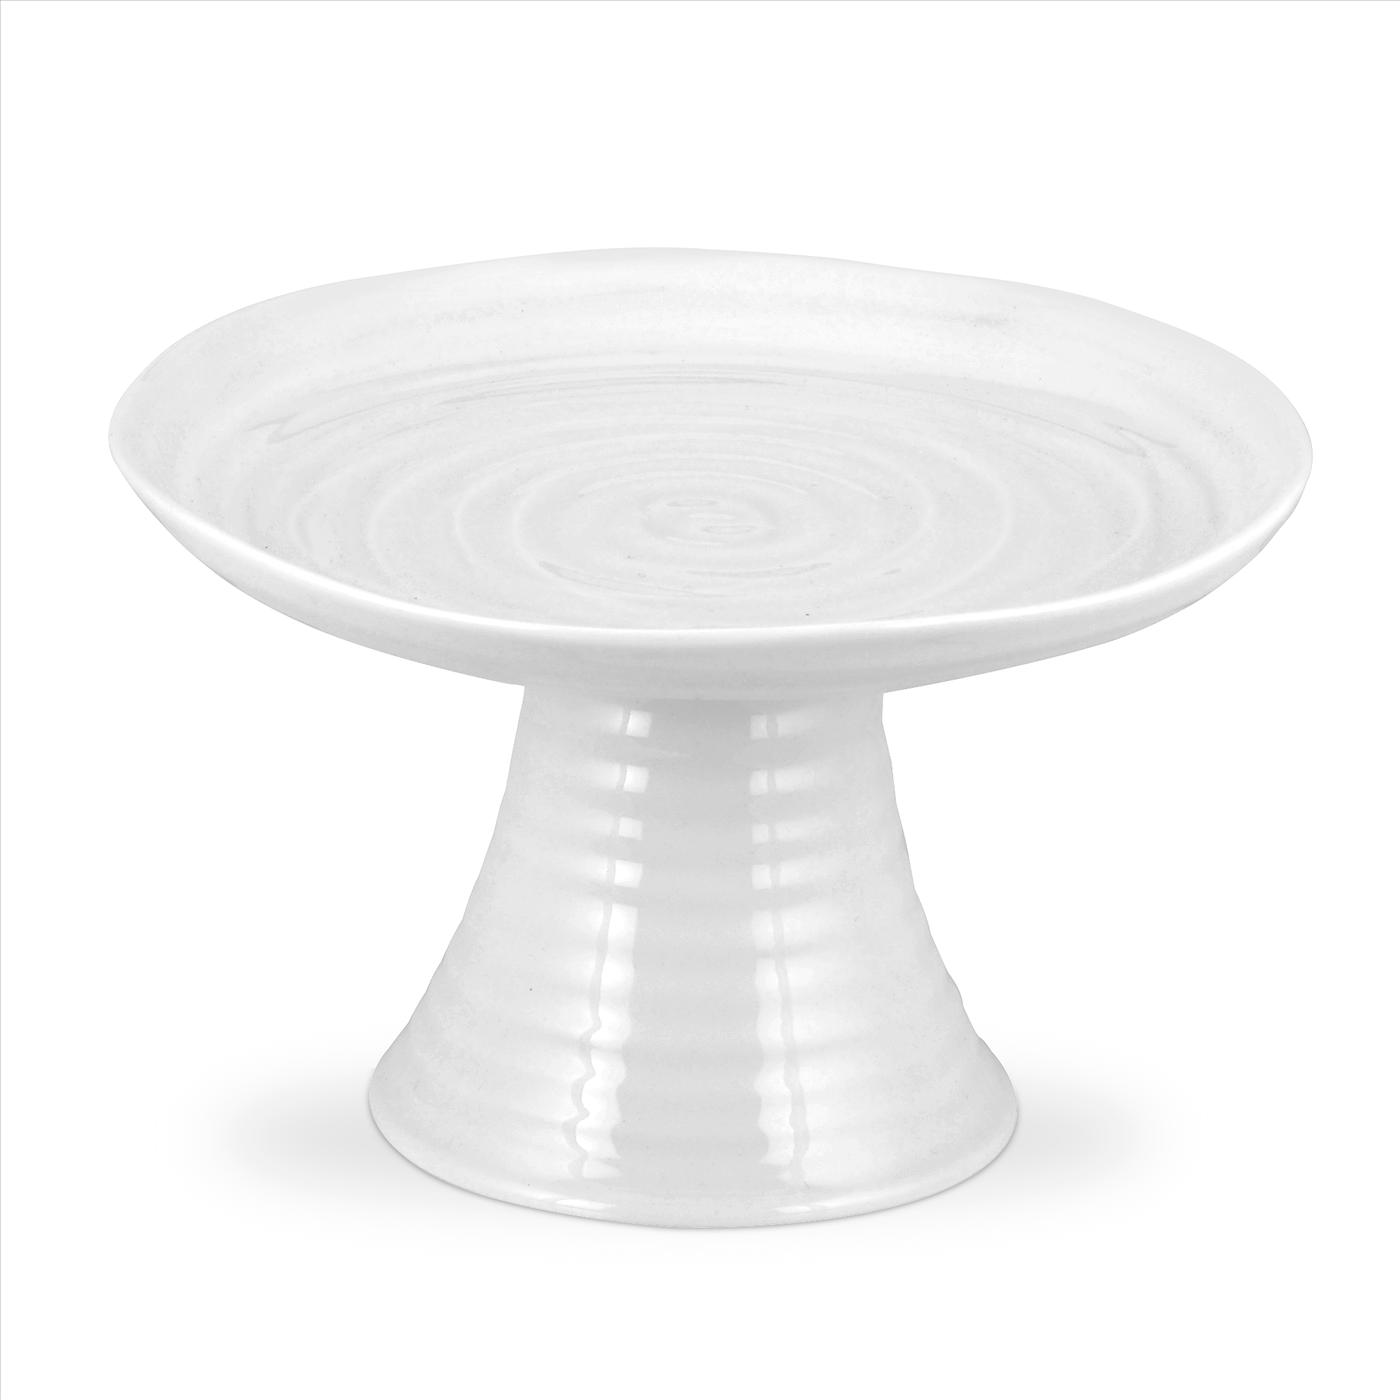 Sophie Conran White Mini Cake Stand image number null